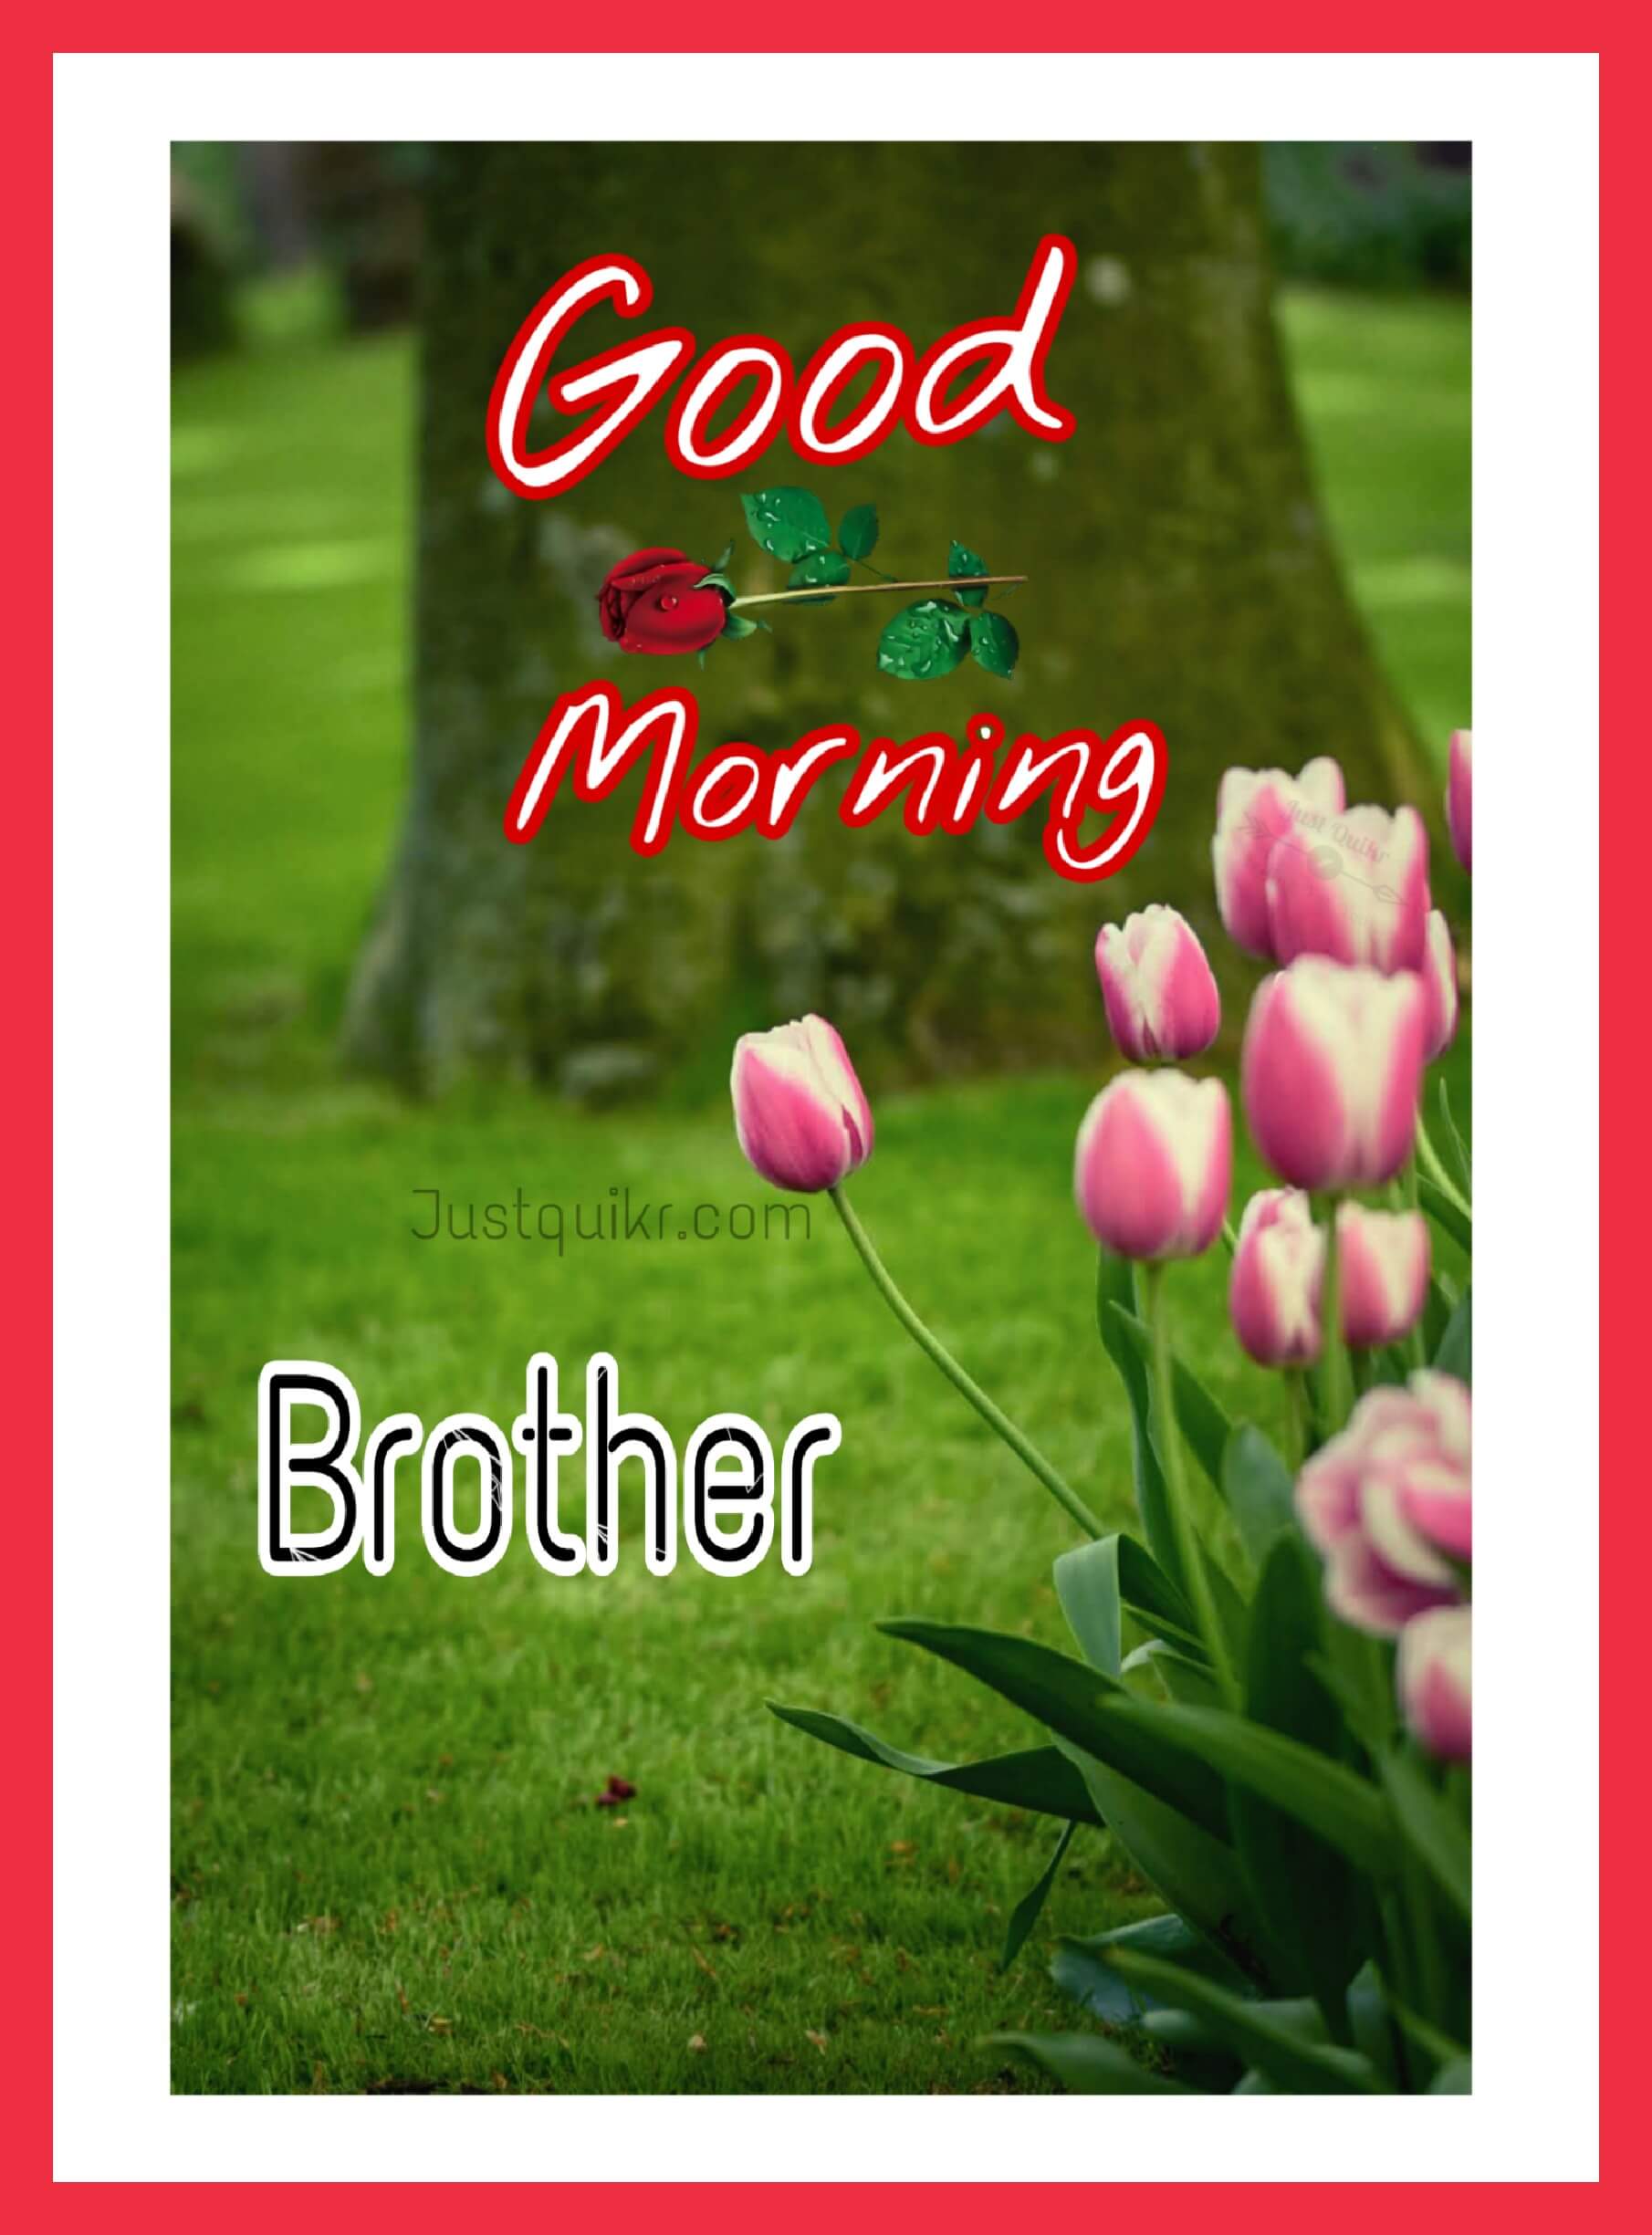 Good Morning Brother